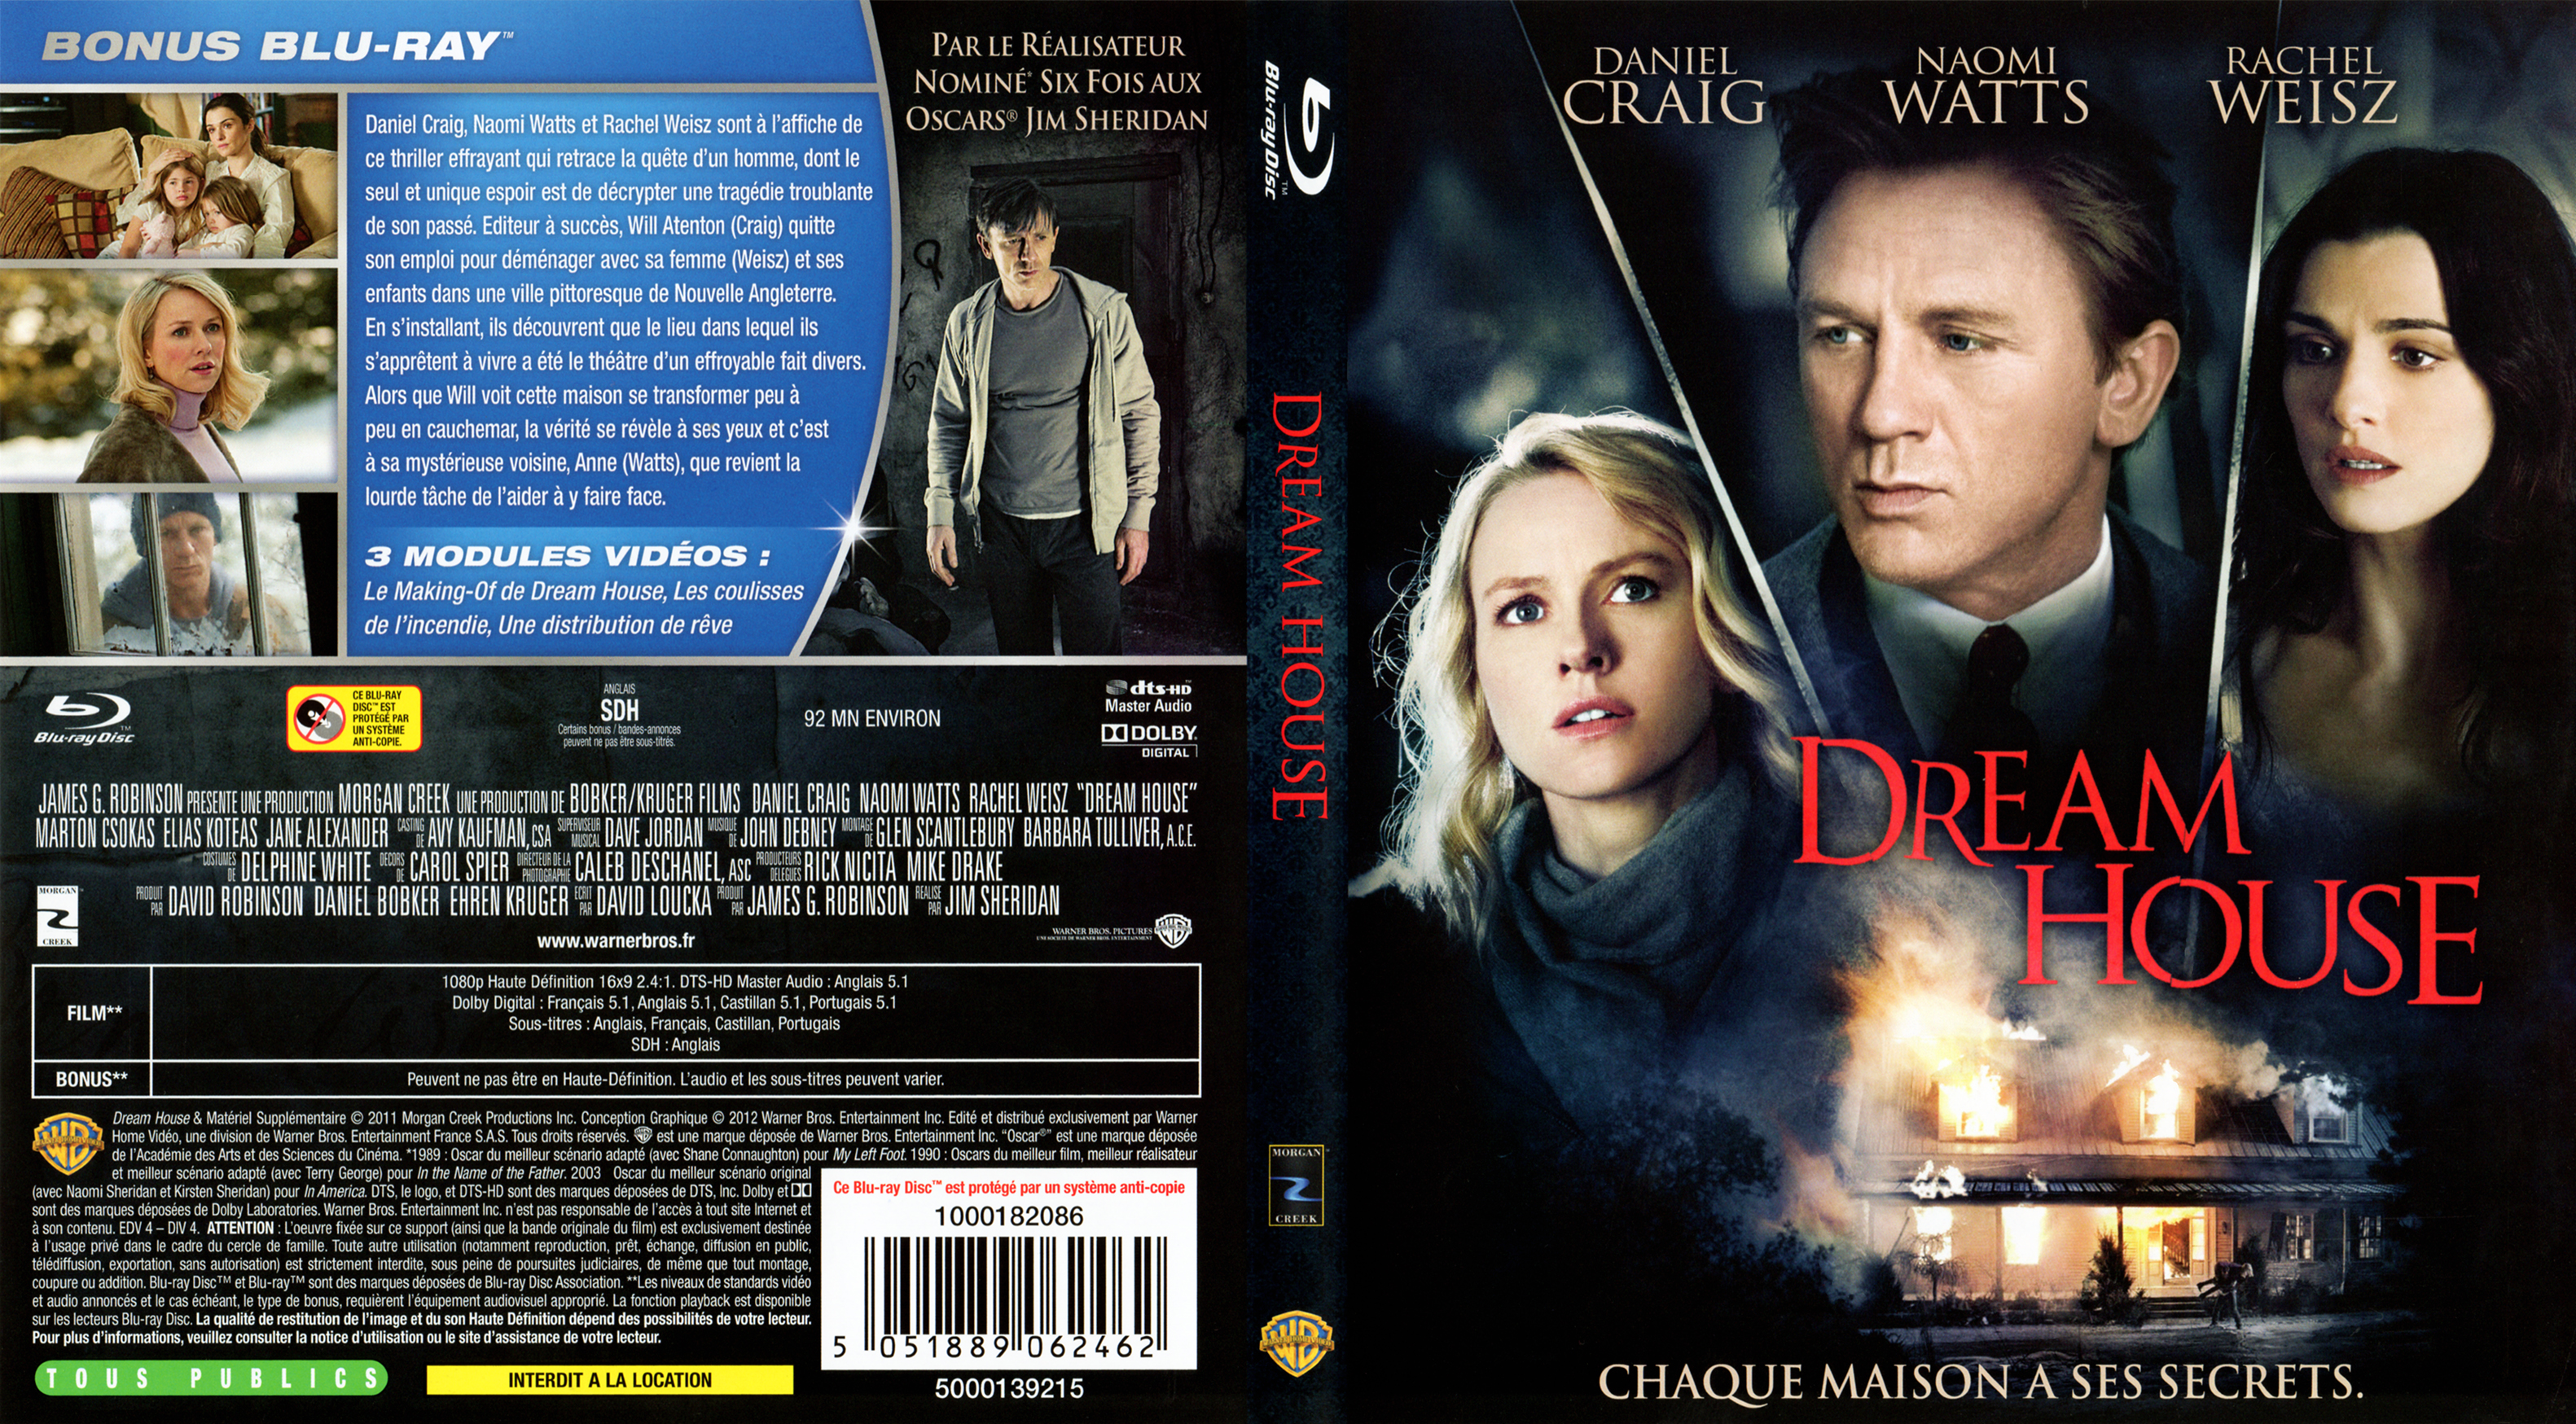 Jaquette DVD Dream house (BLU-RAY)